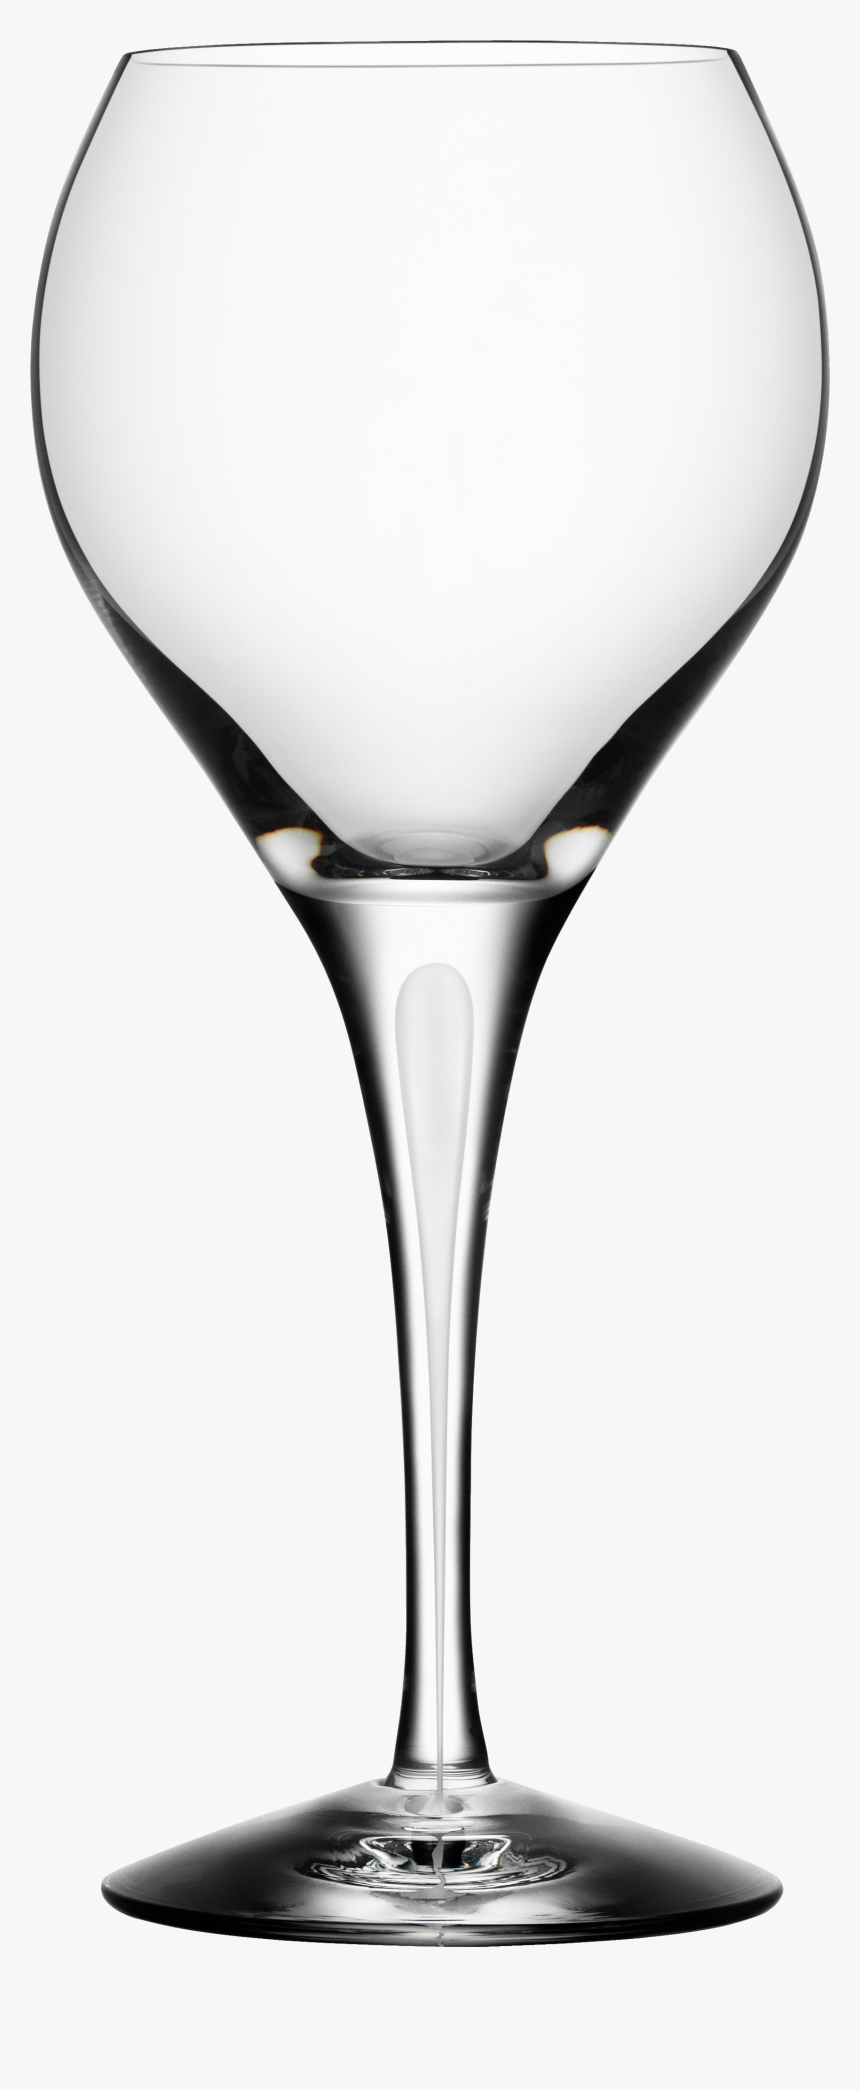 Empty Wine Glass Png Image, Transparent Png, Free Download